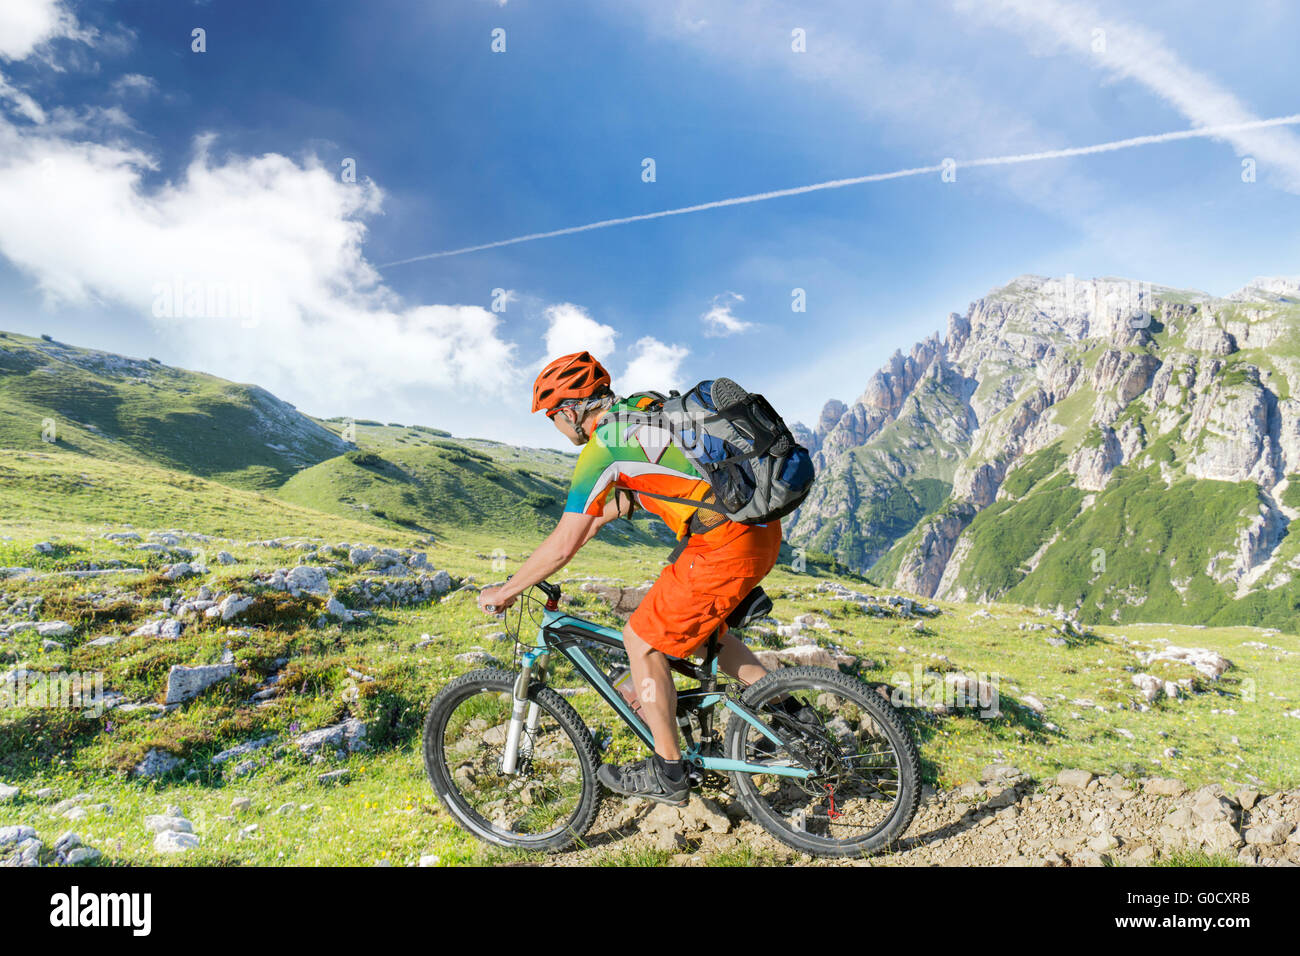 Mountain bike rider with rucksack rides a rocky single trail in the mountains Stock Photo